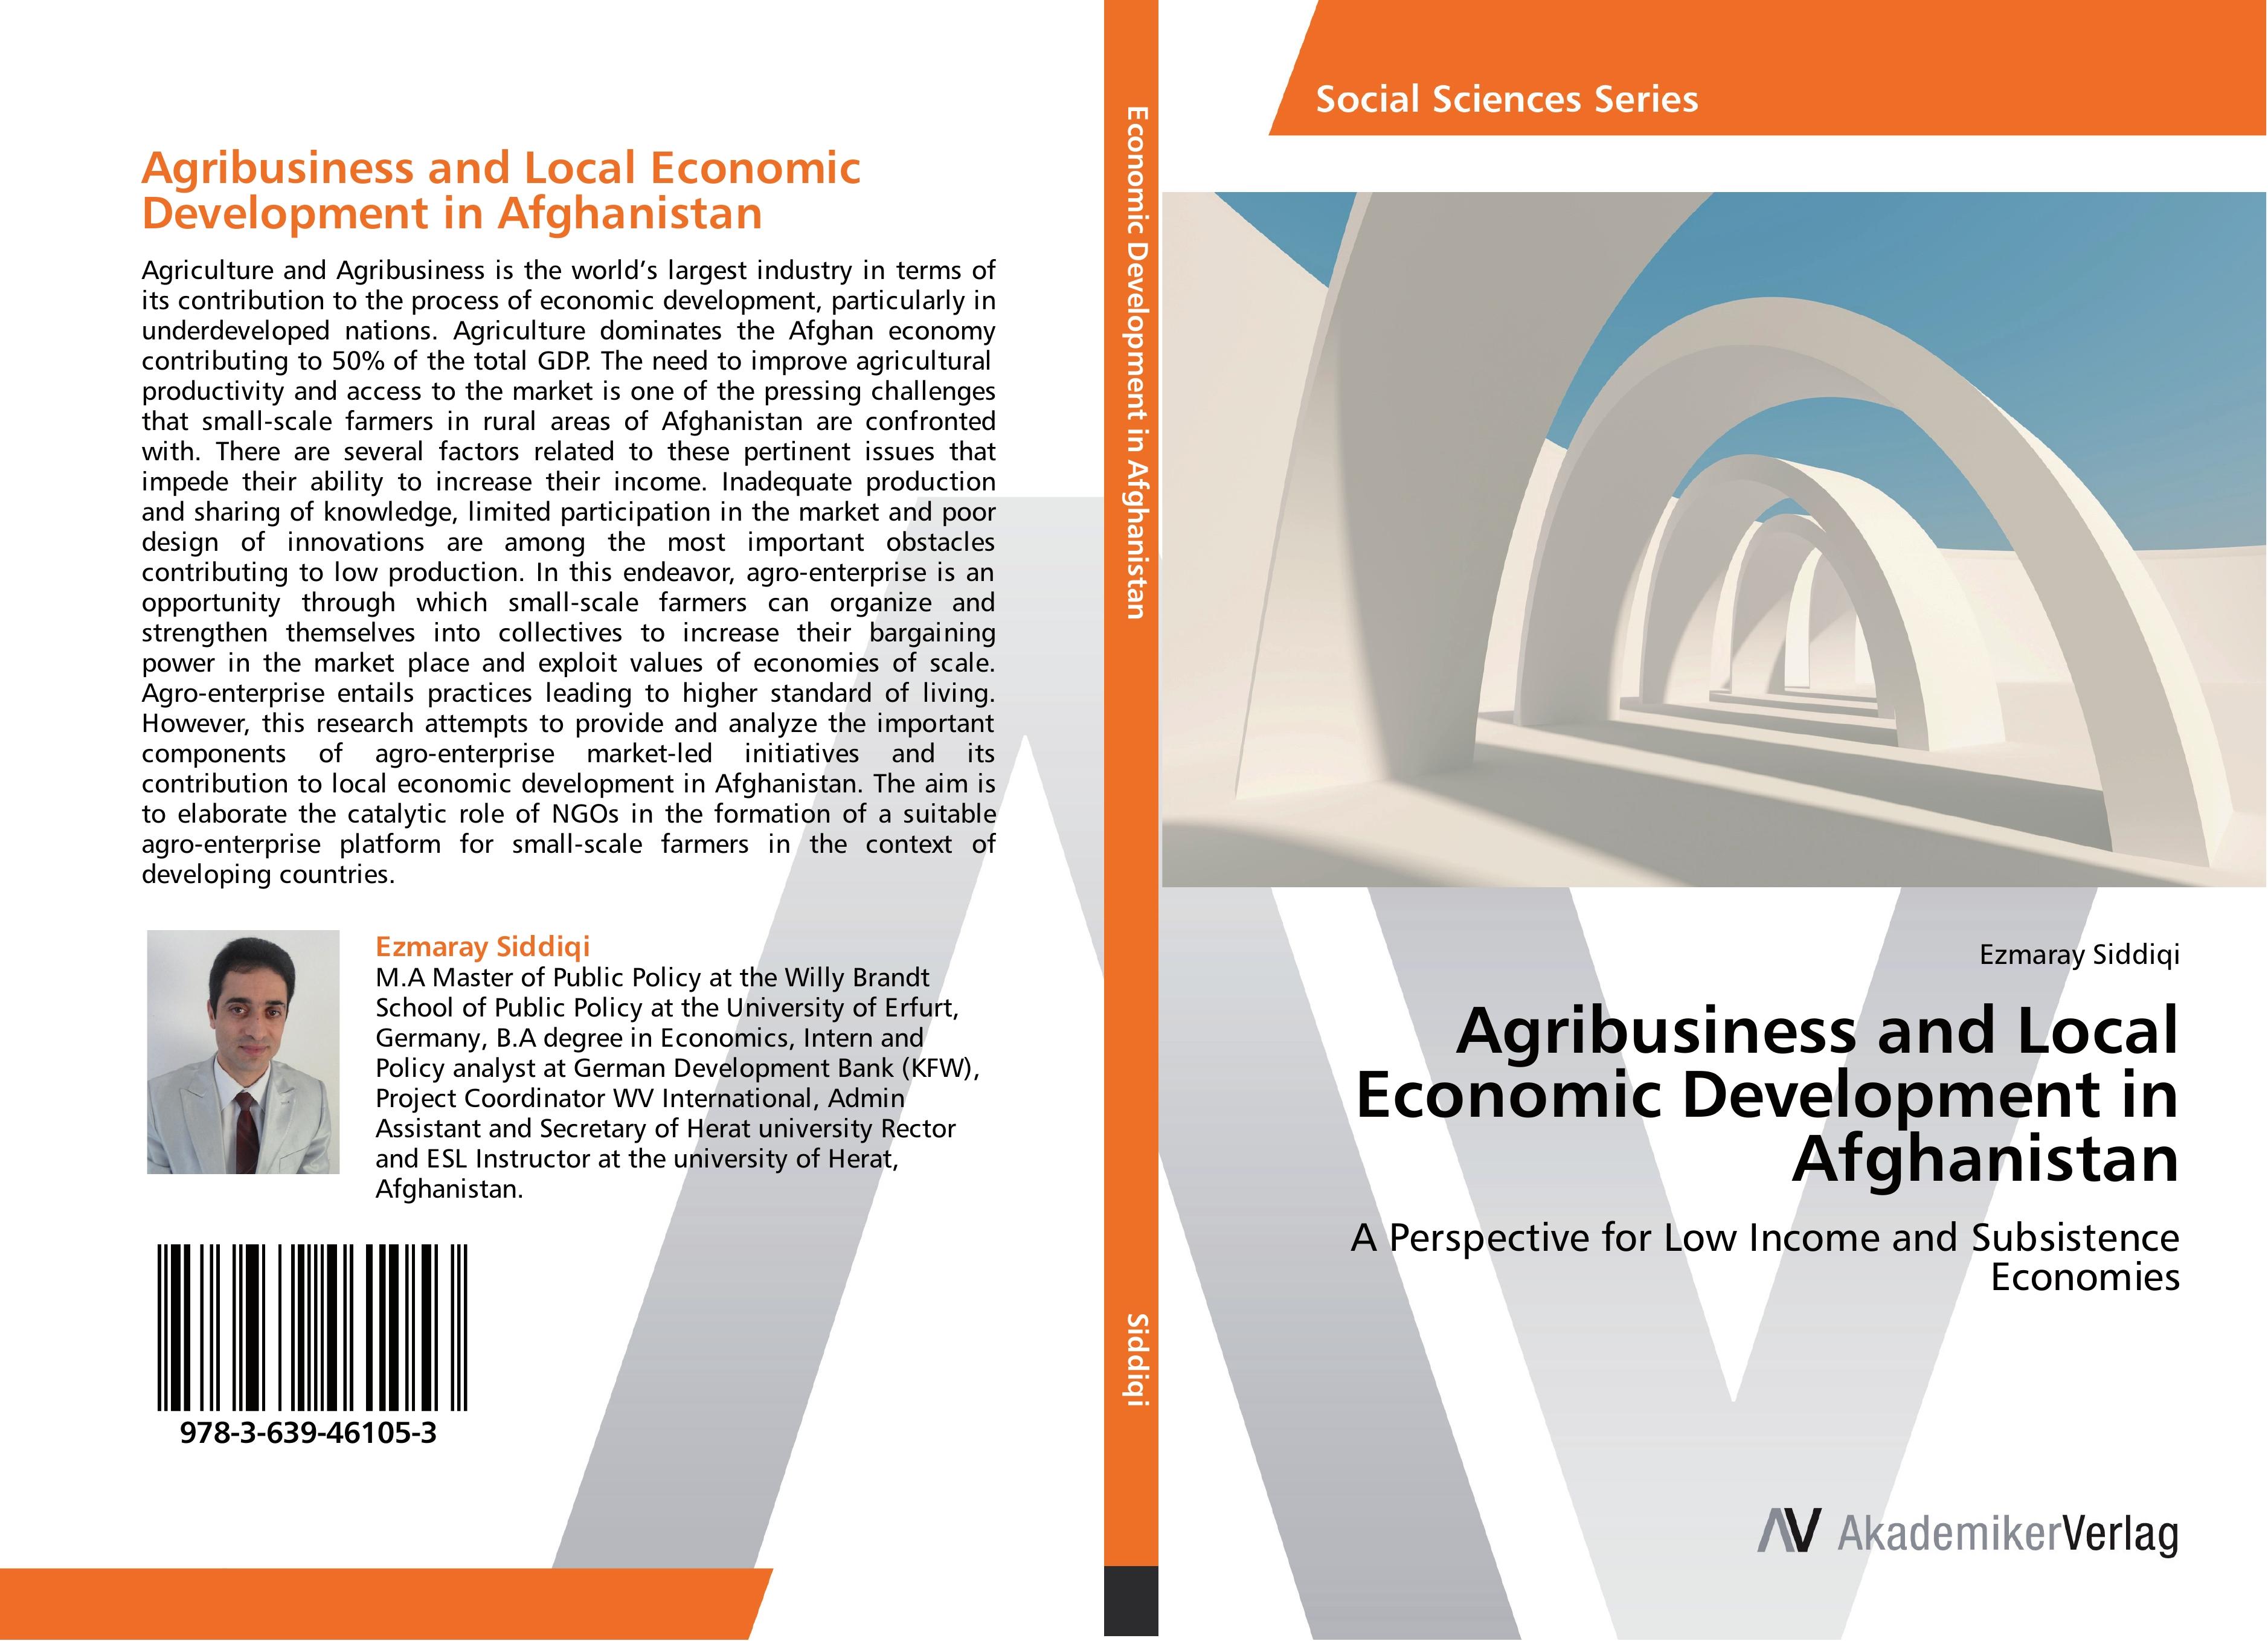 Agribusiness and Local Economic Development in Afghanistan - Ezmaray Siddiqi